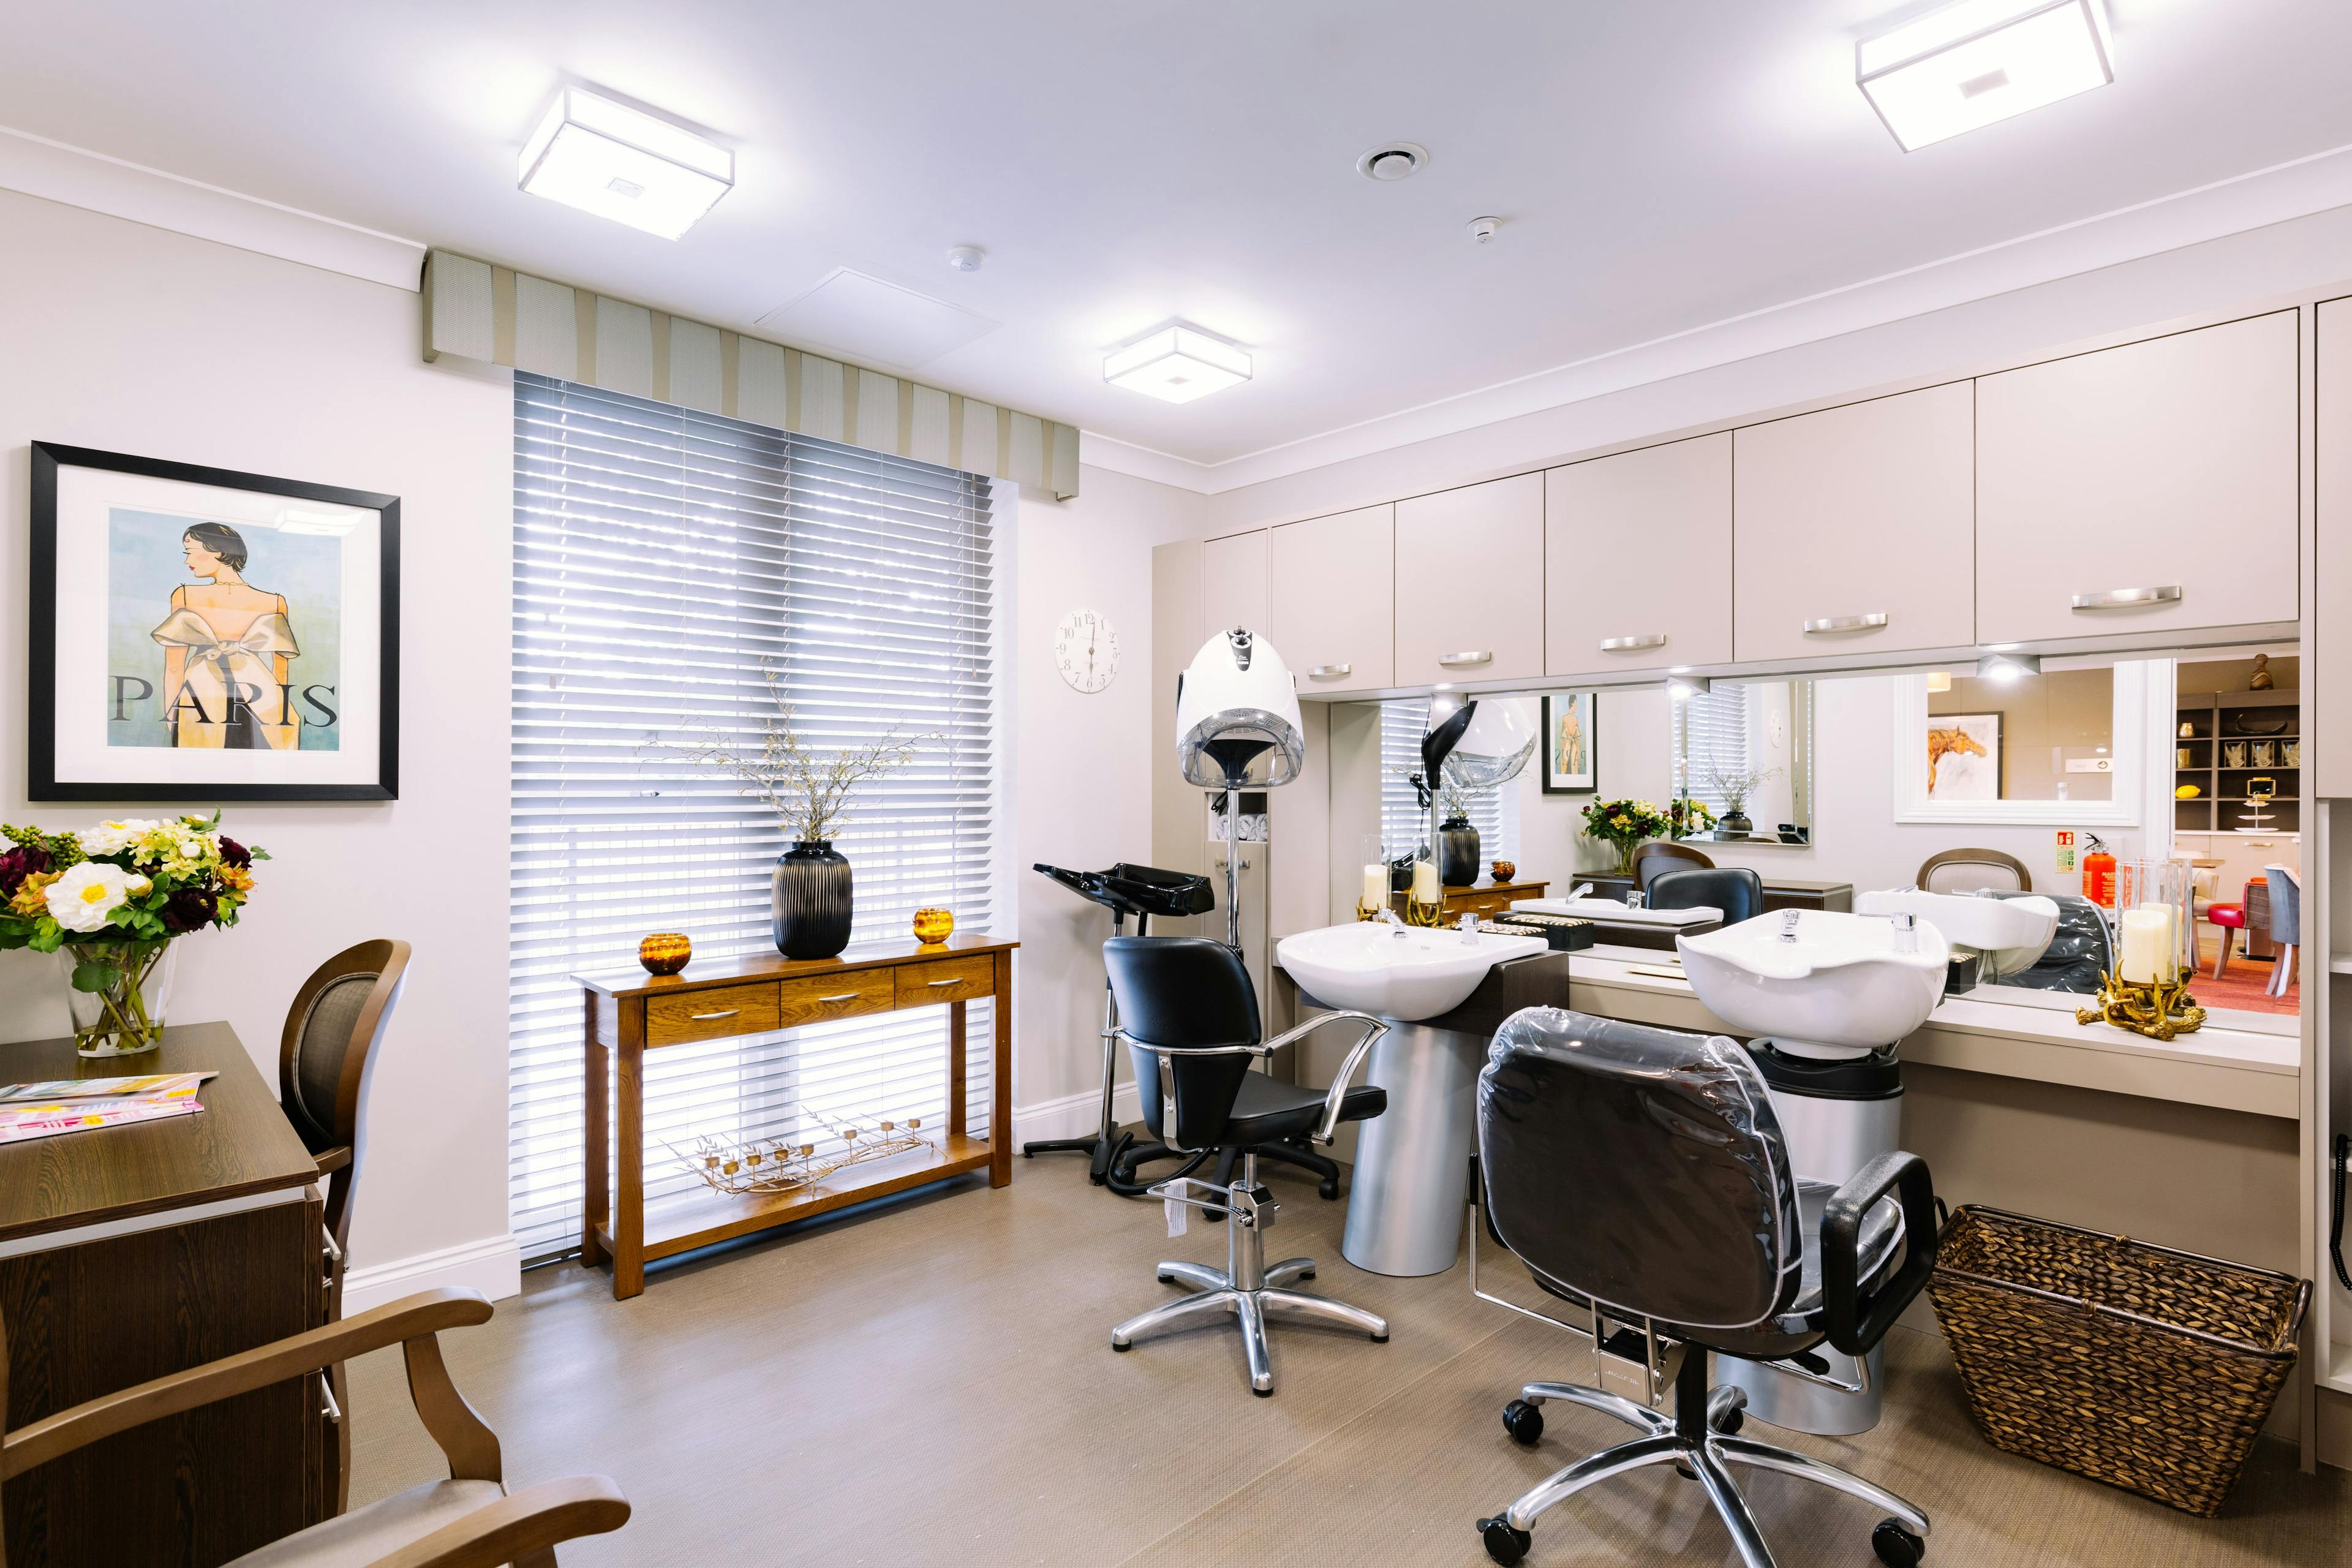 Salon at Ouse View Care Home in York, North Yorkshire